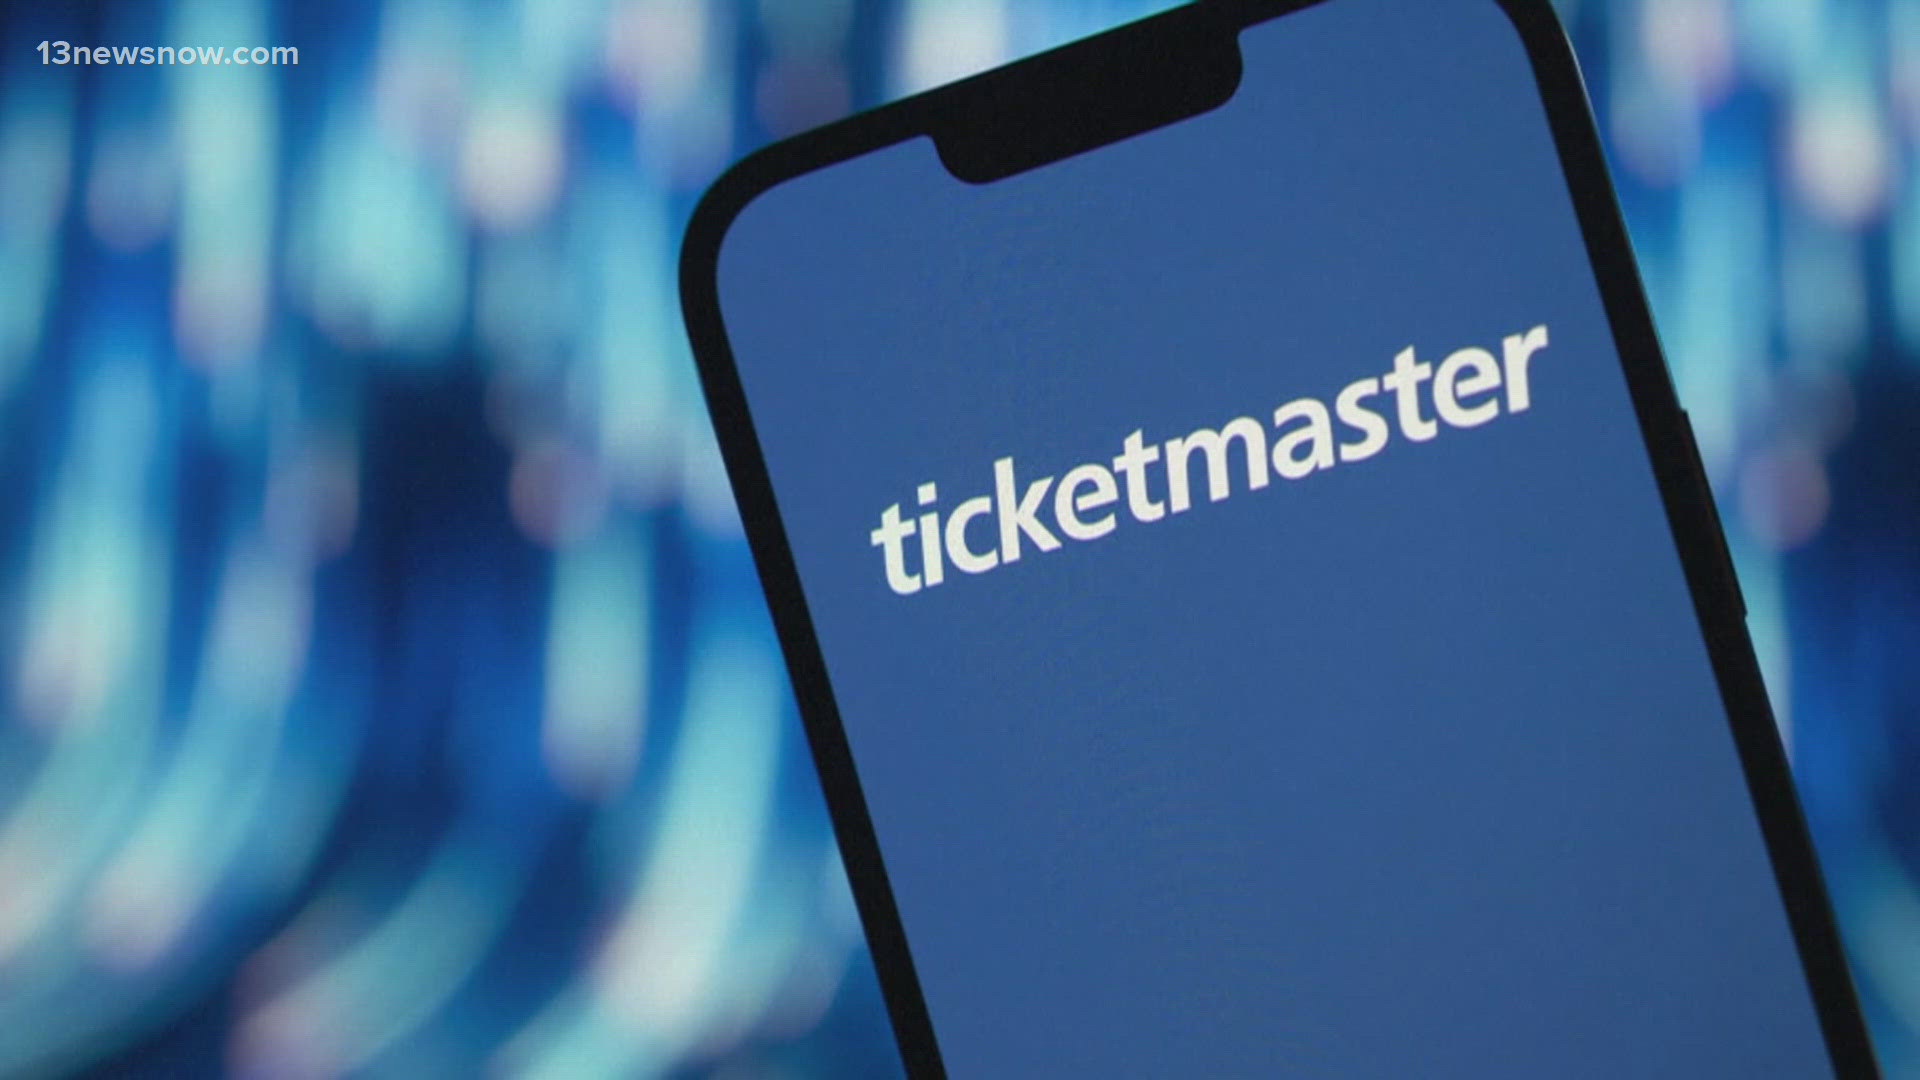 The DOJ is accusing the ticket sales company of running an illegal monopoly over live events in America. Squelching competition and driving up prices for fans.